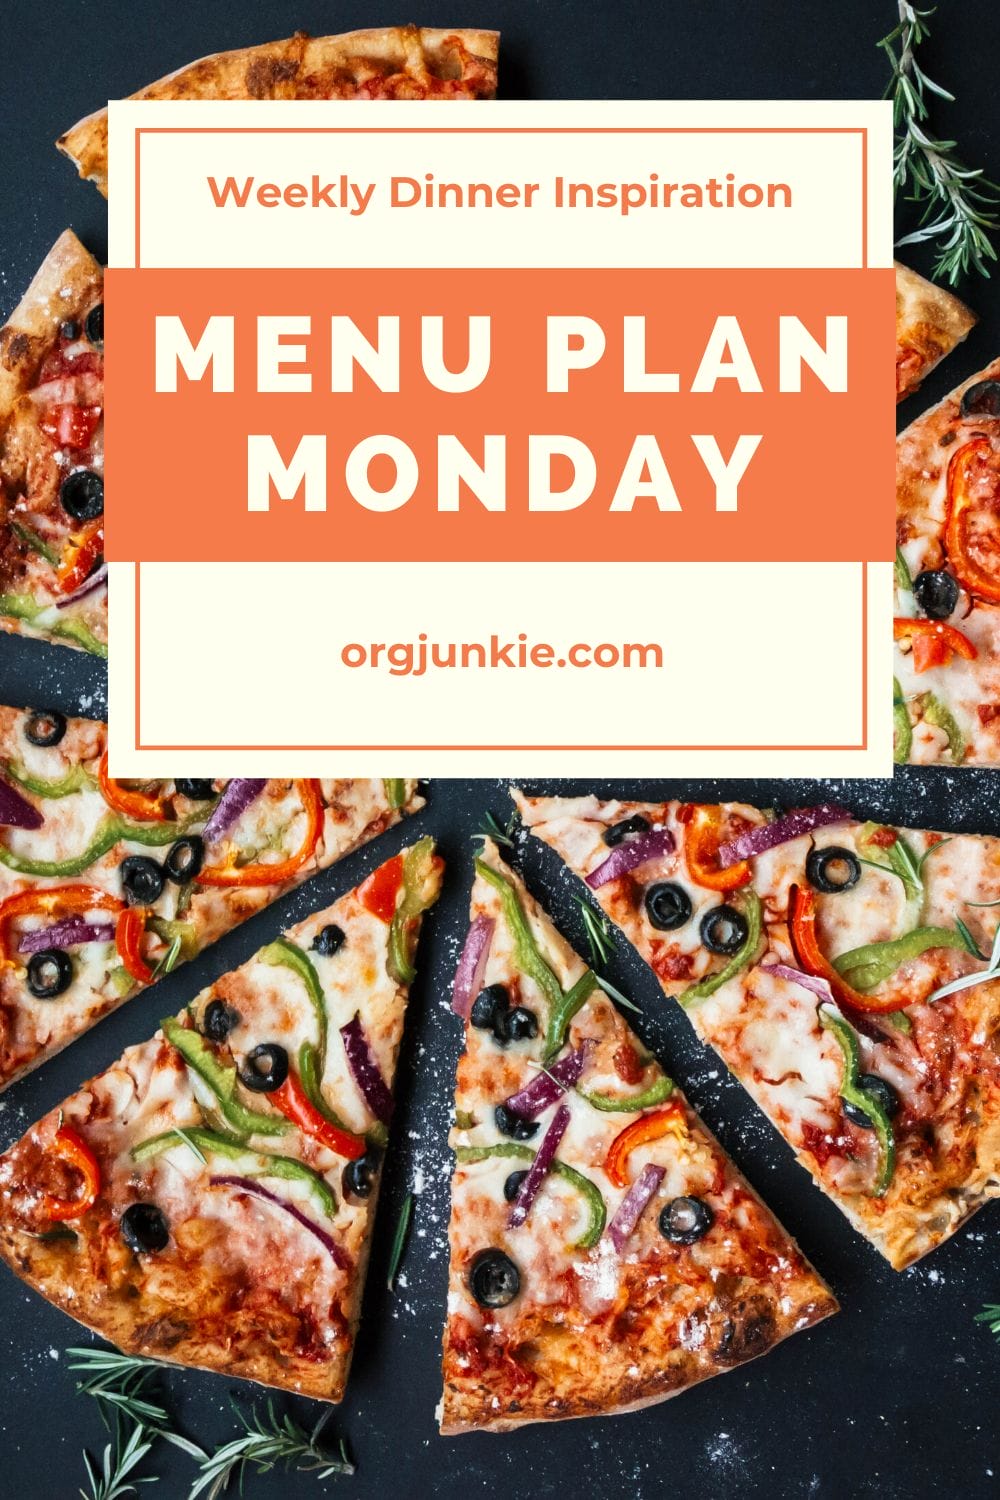 Menu Plan Monday for the week of March 23/20 ~ weekly dinner inspiration to help you get dinner on the table each night with less stress and chaos